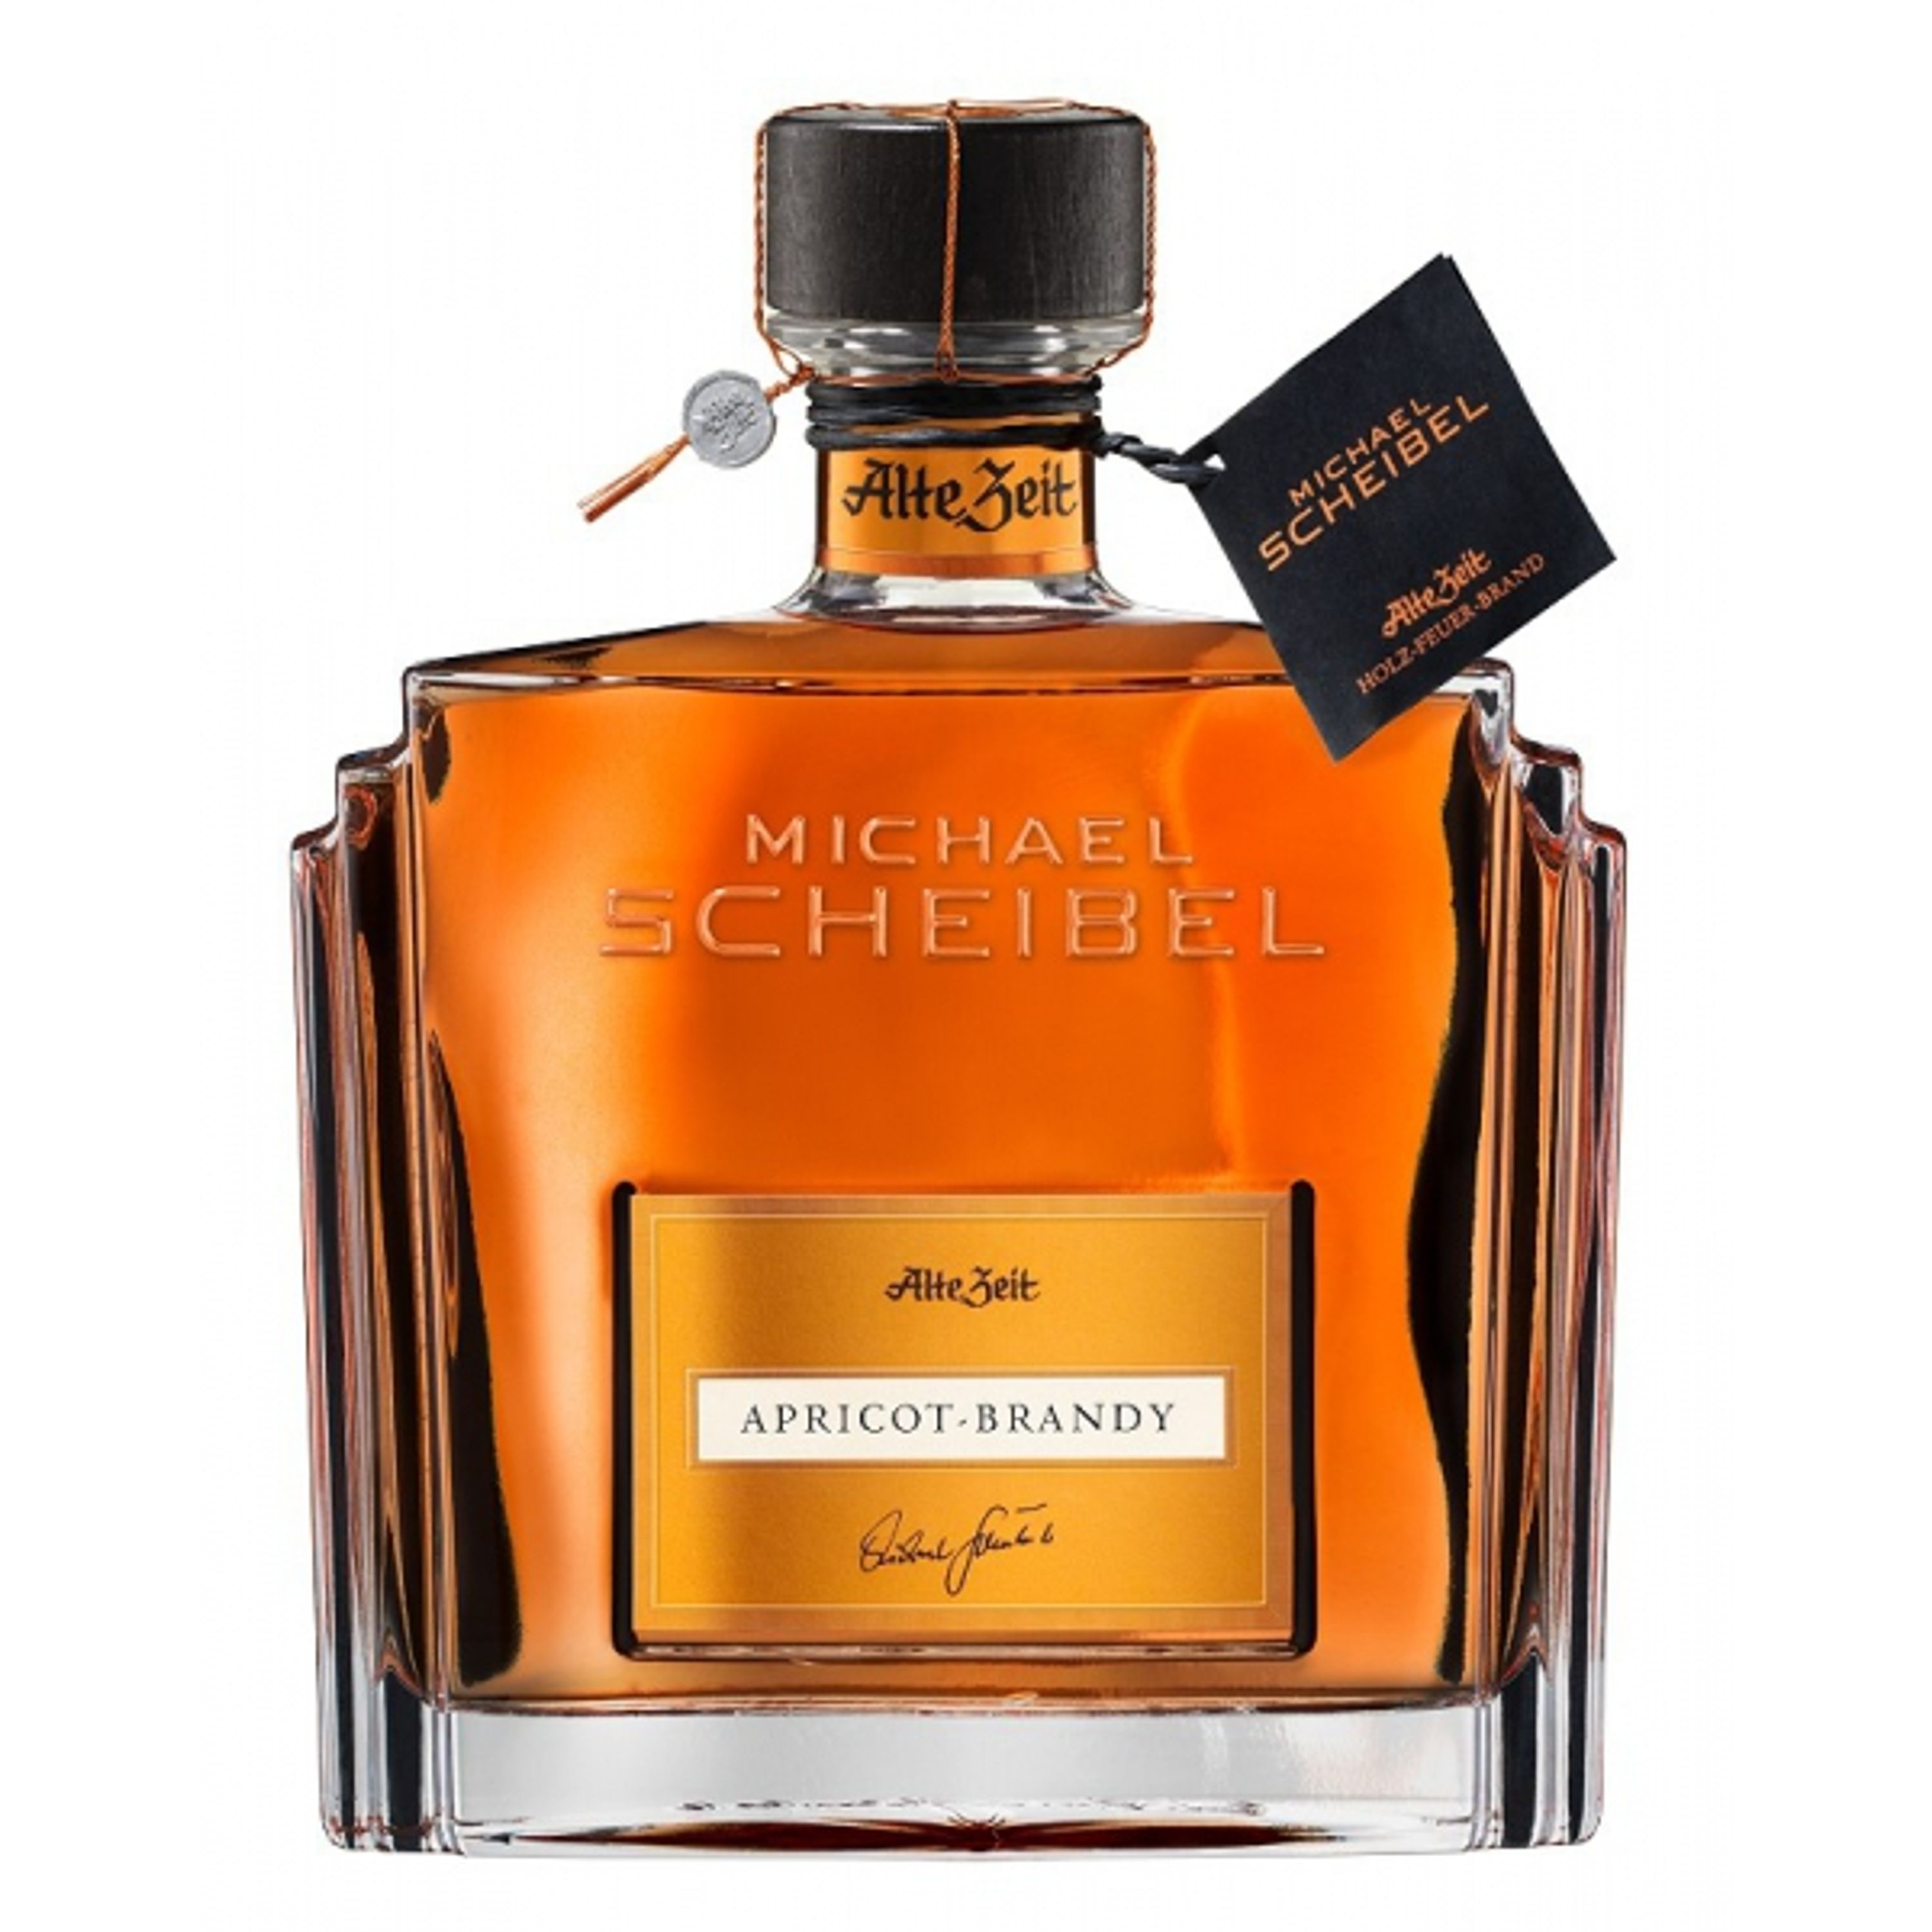 Scheibel Old Time Apricot Brandy 0.7l, alc. 35% by volume